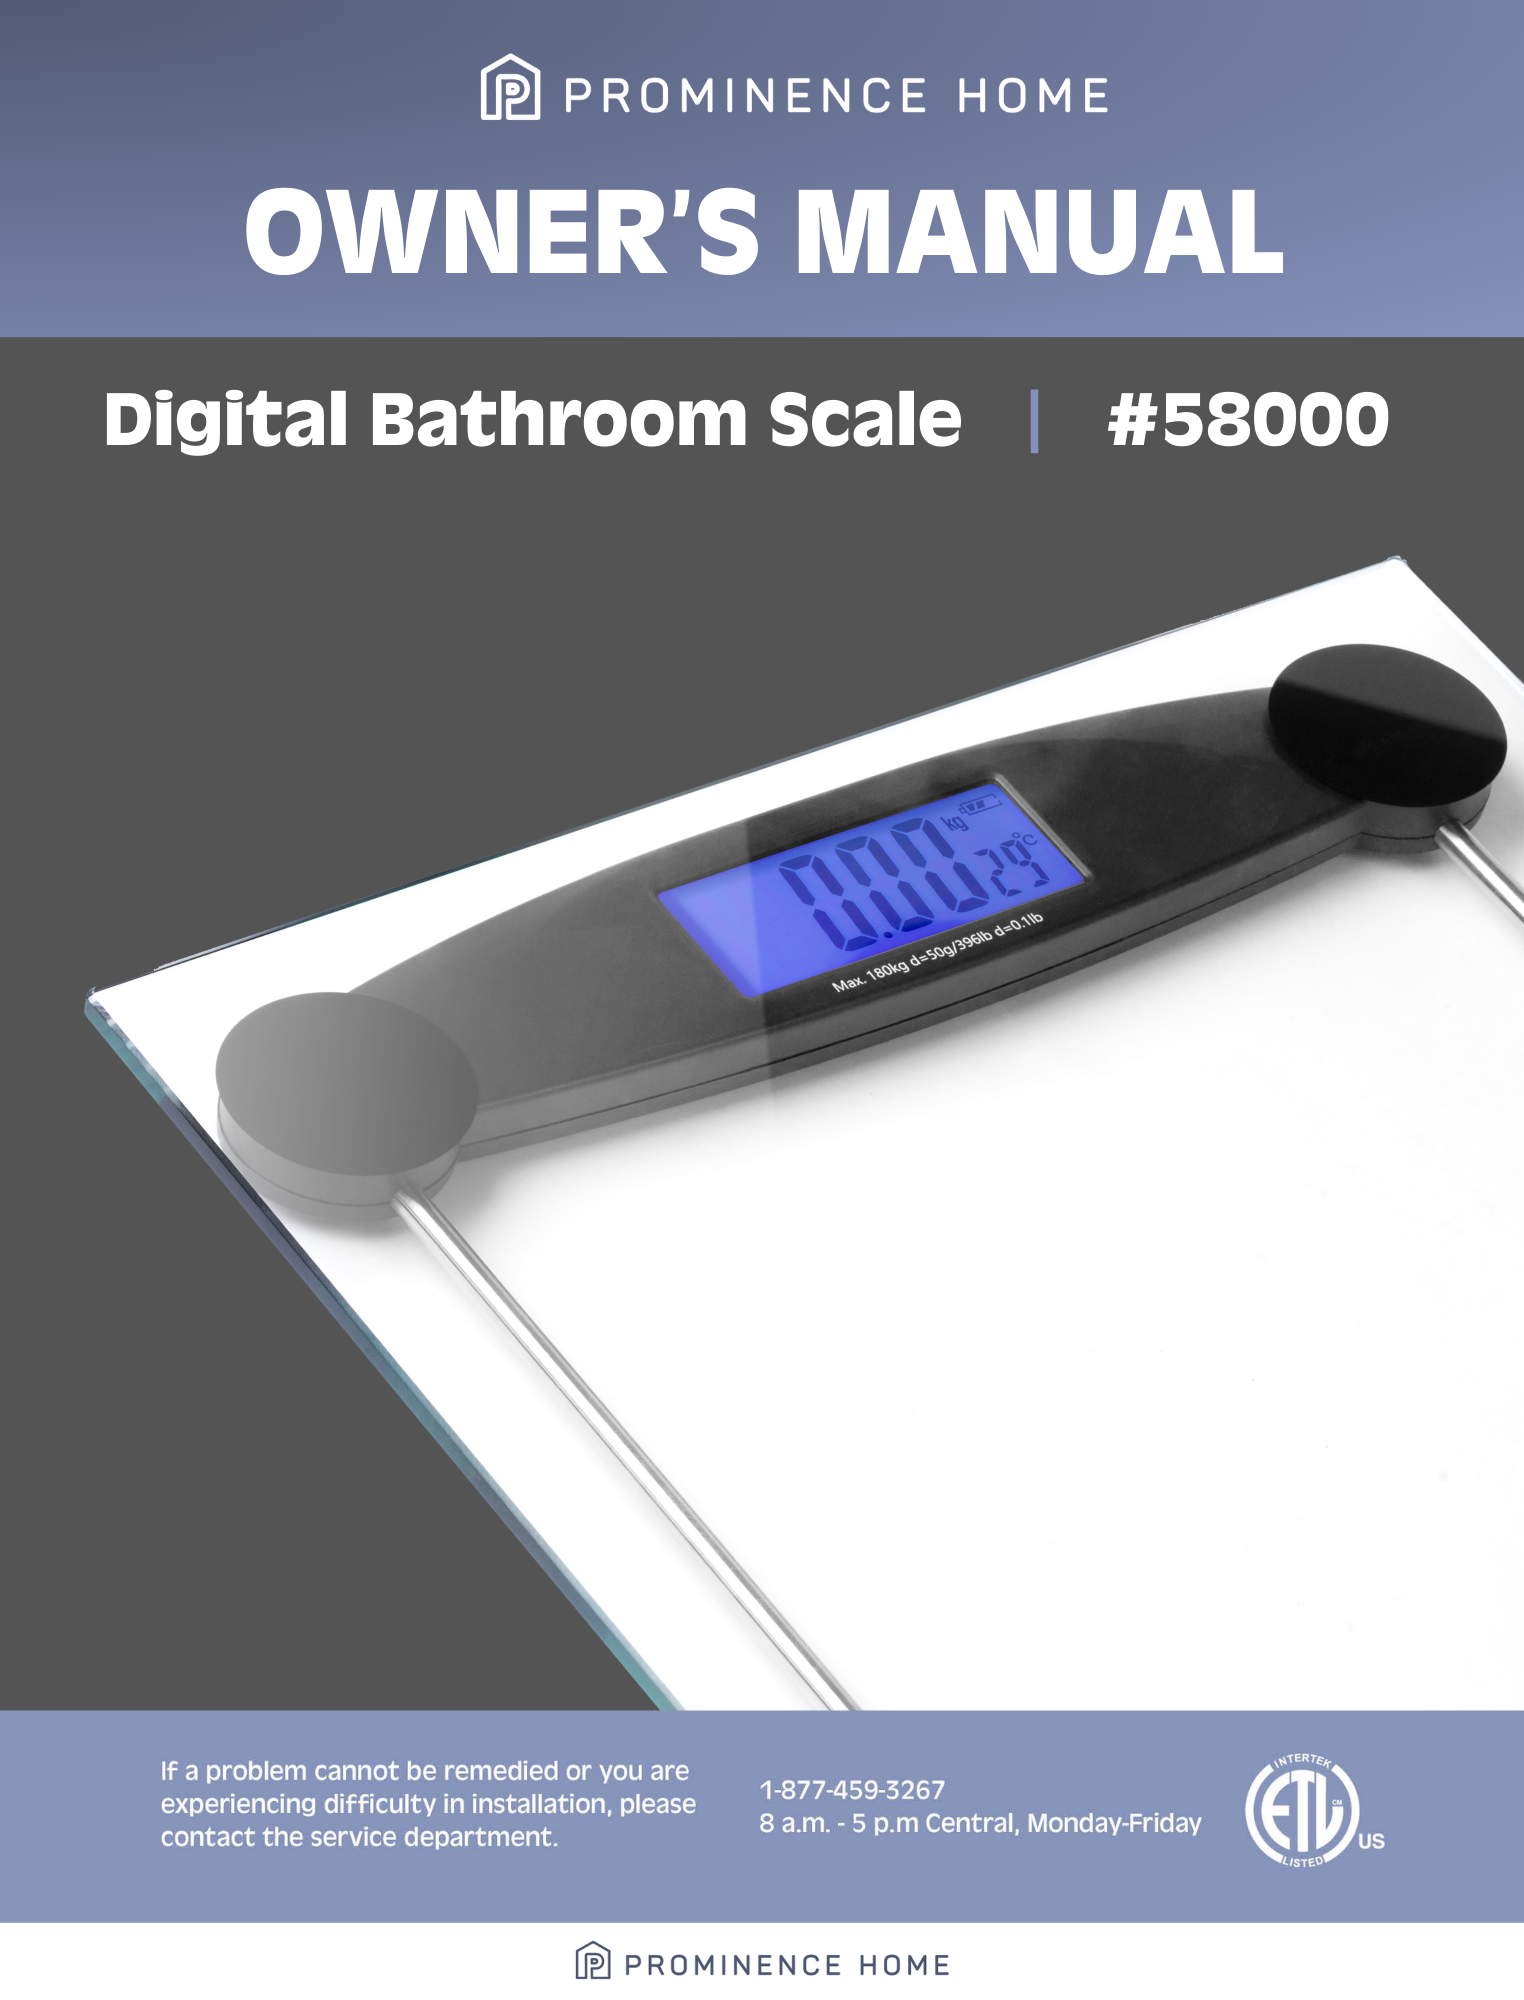 https://cld.accentuate.io/8132431118575/1697124395165/58000-Digital-Bathroom-Scale.png?v=1697124395165&options=